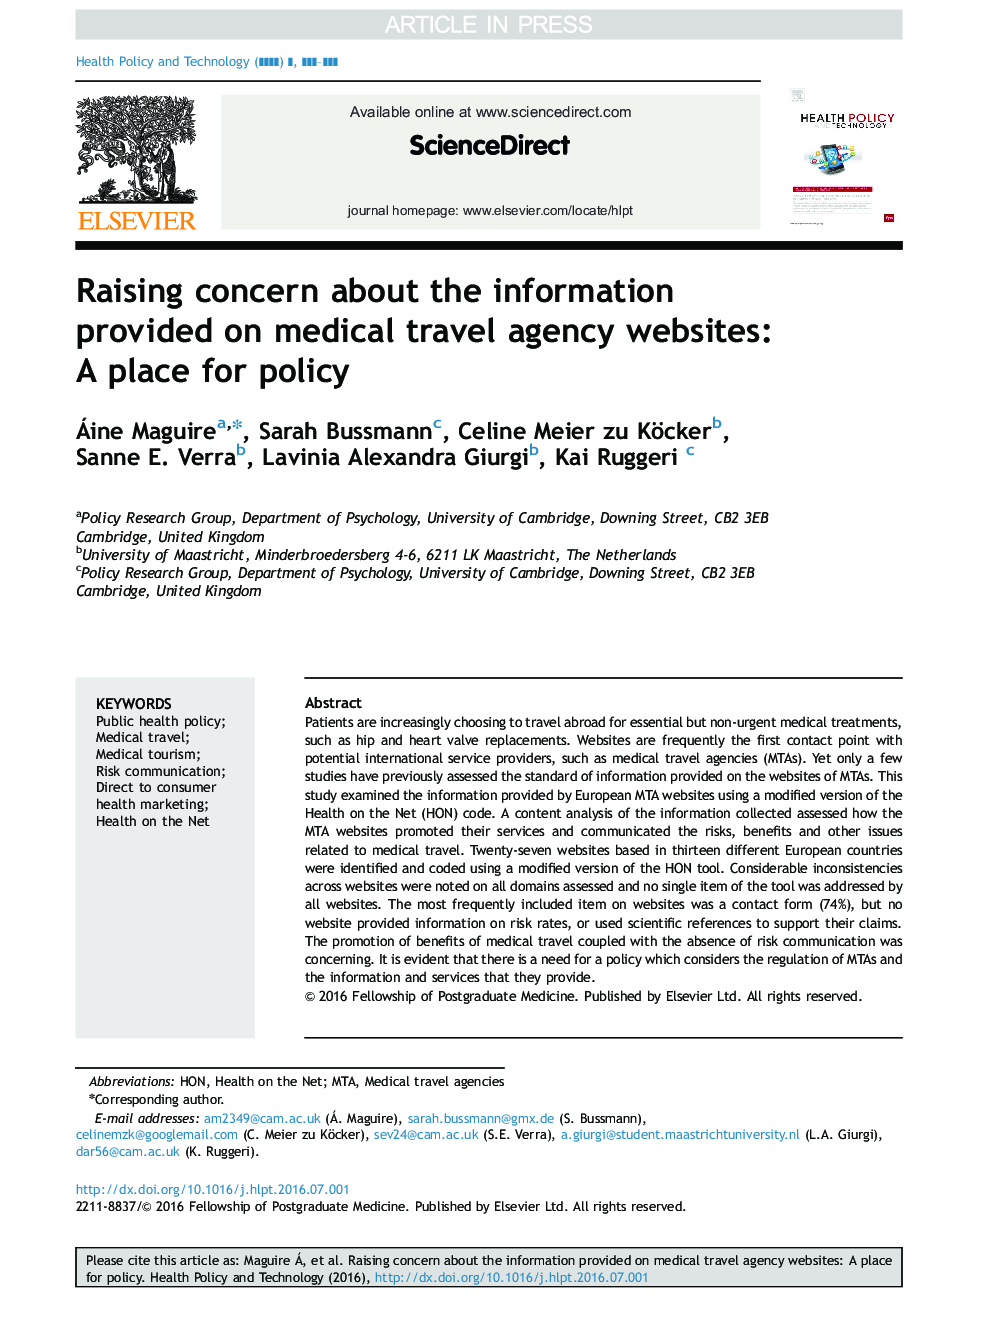 Raising concern about the information provided on medical travel agency websites: A place for policy